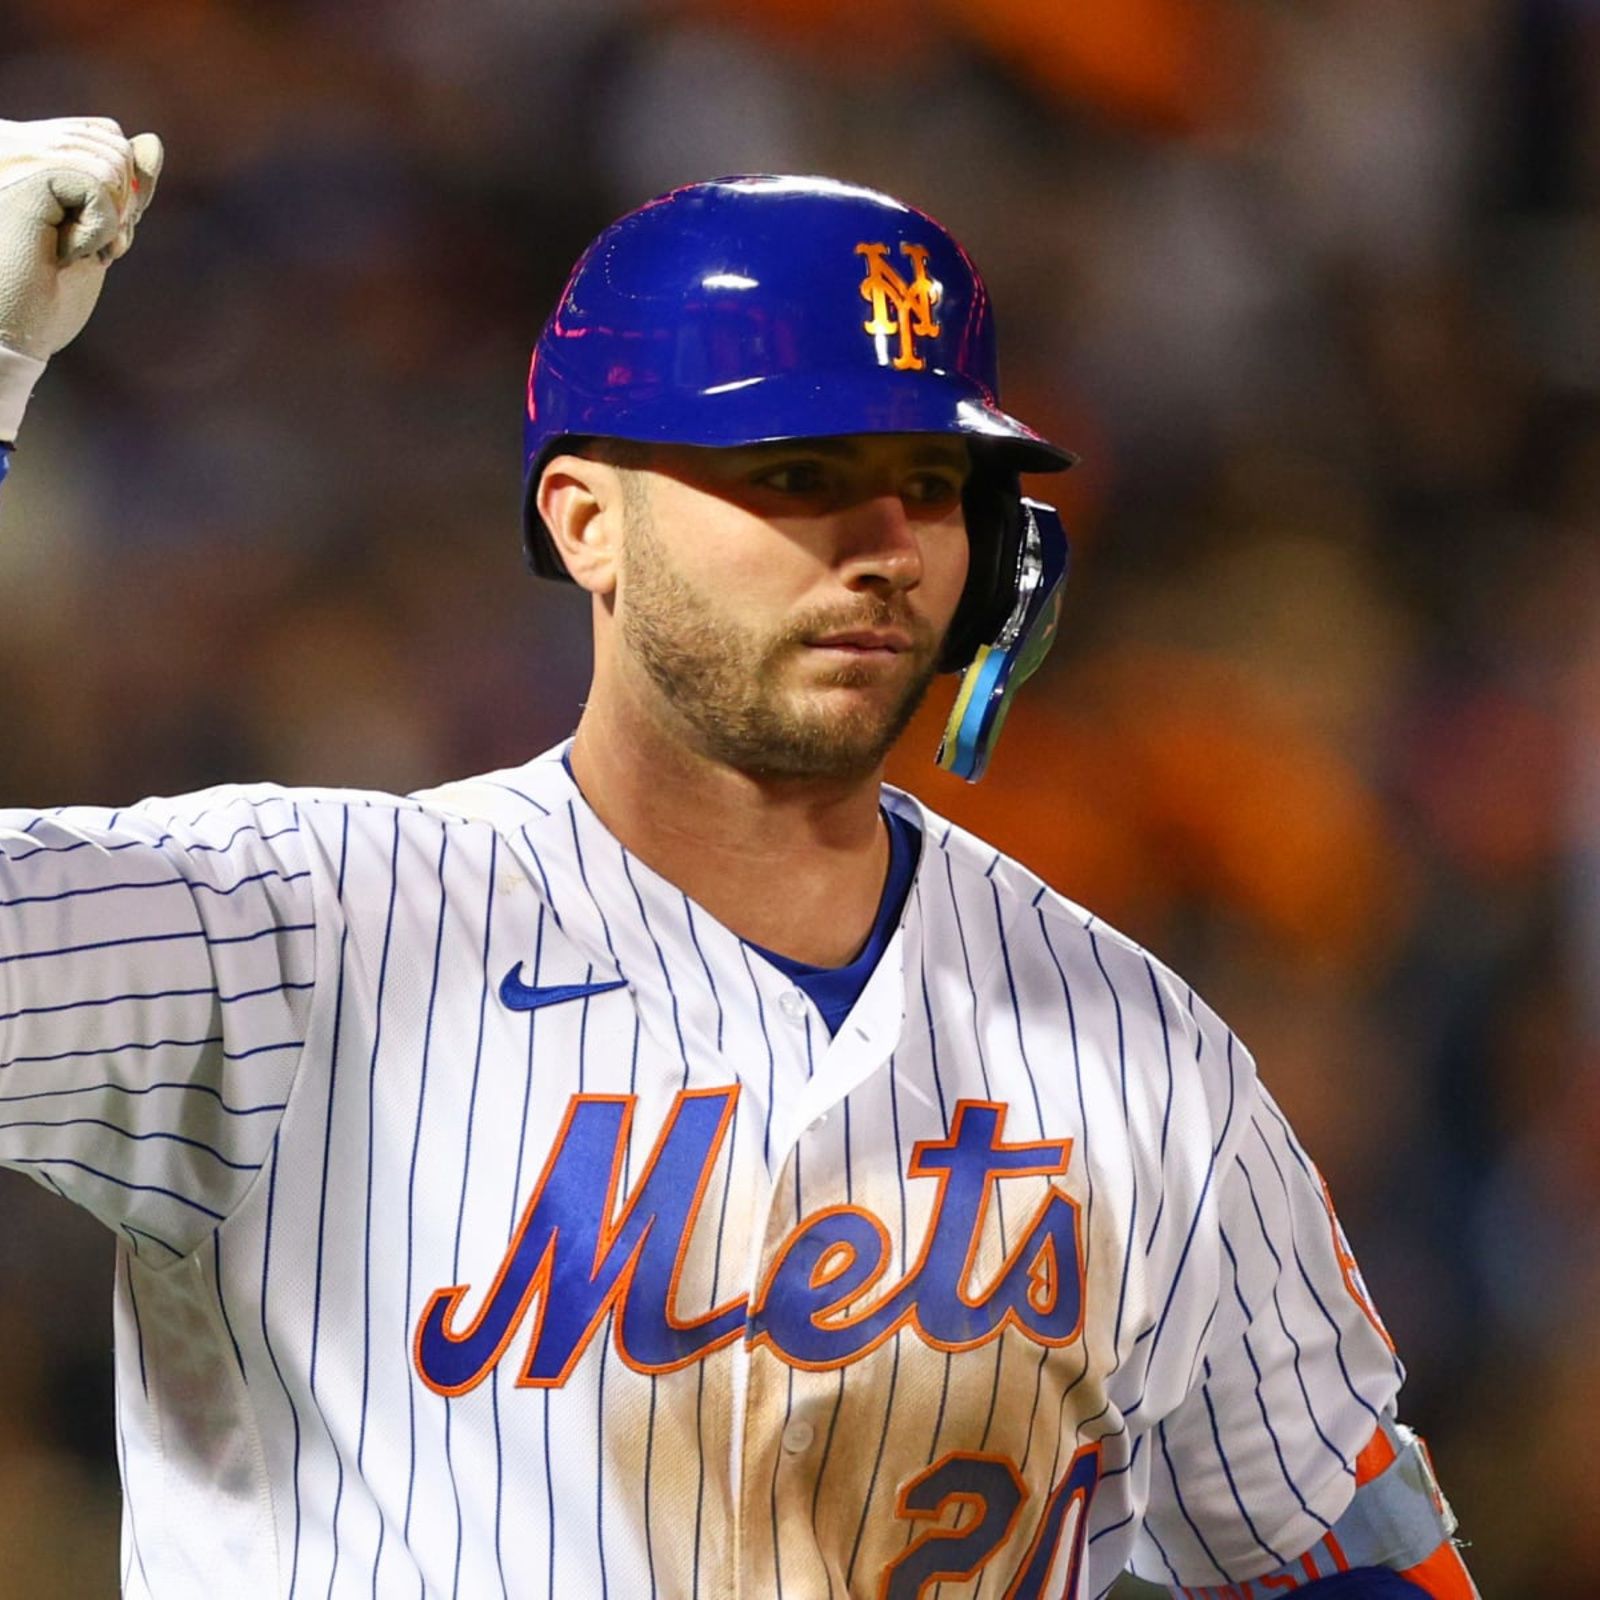 NY Mets should sign Pete Alonso to an extension immediately